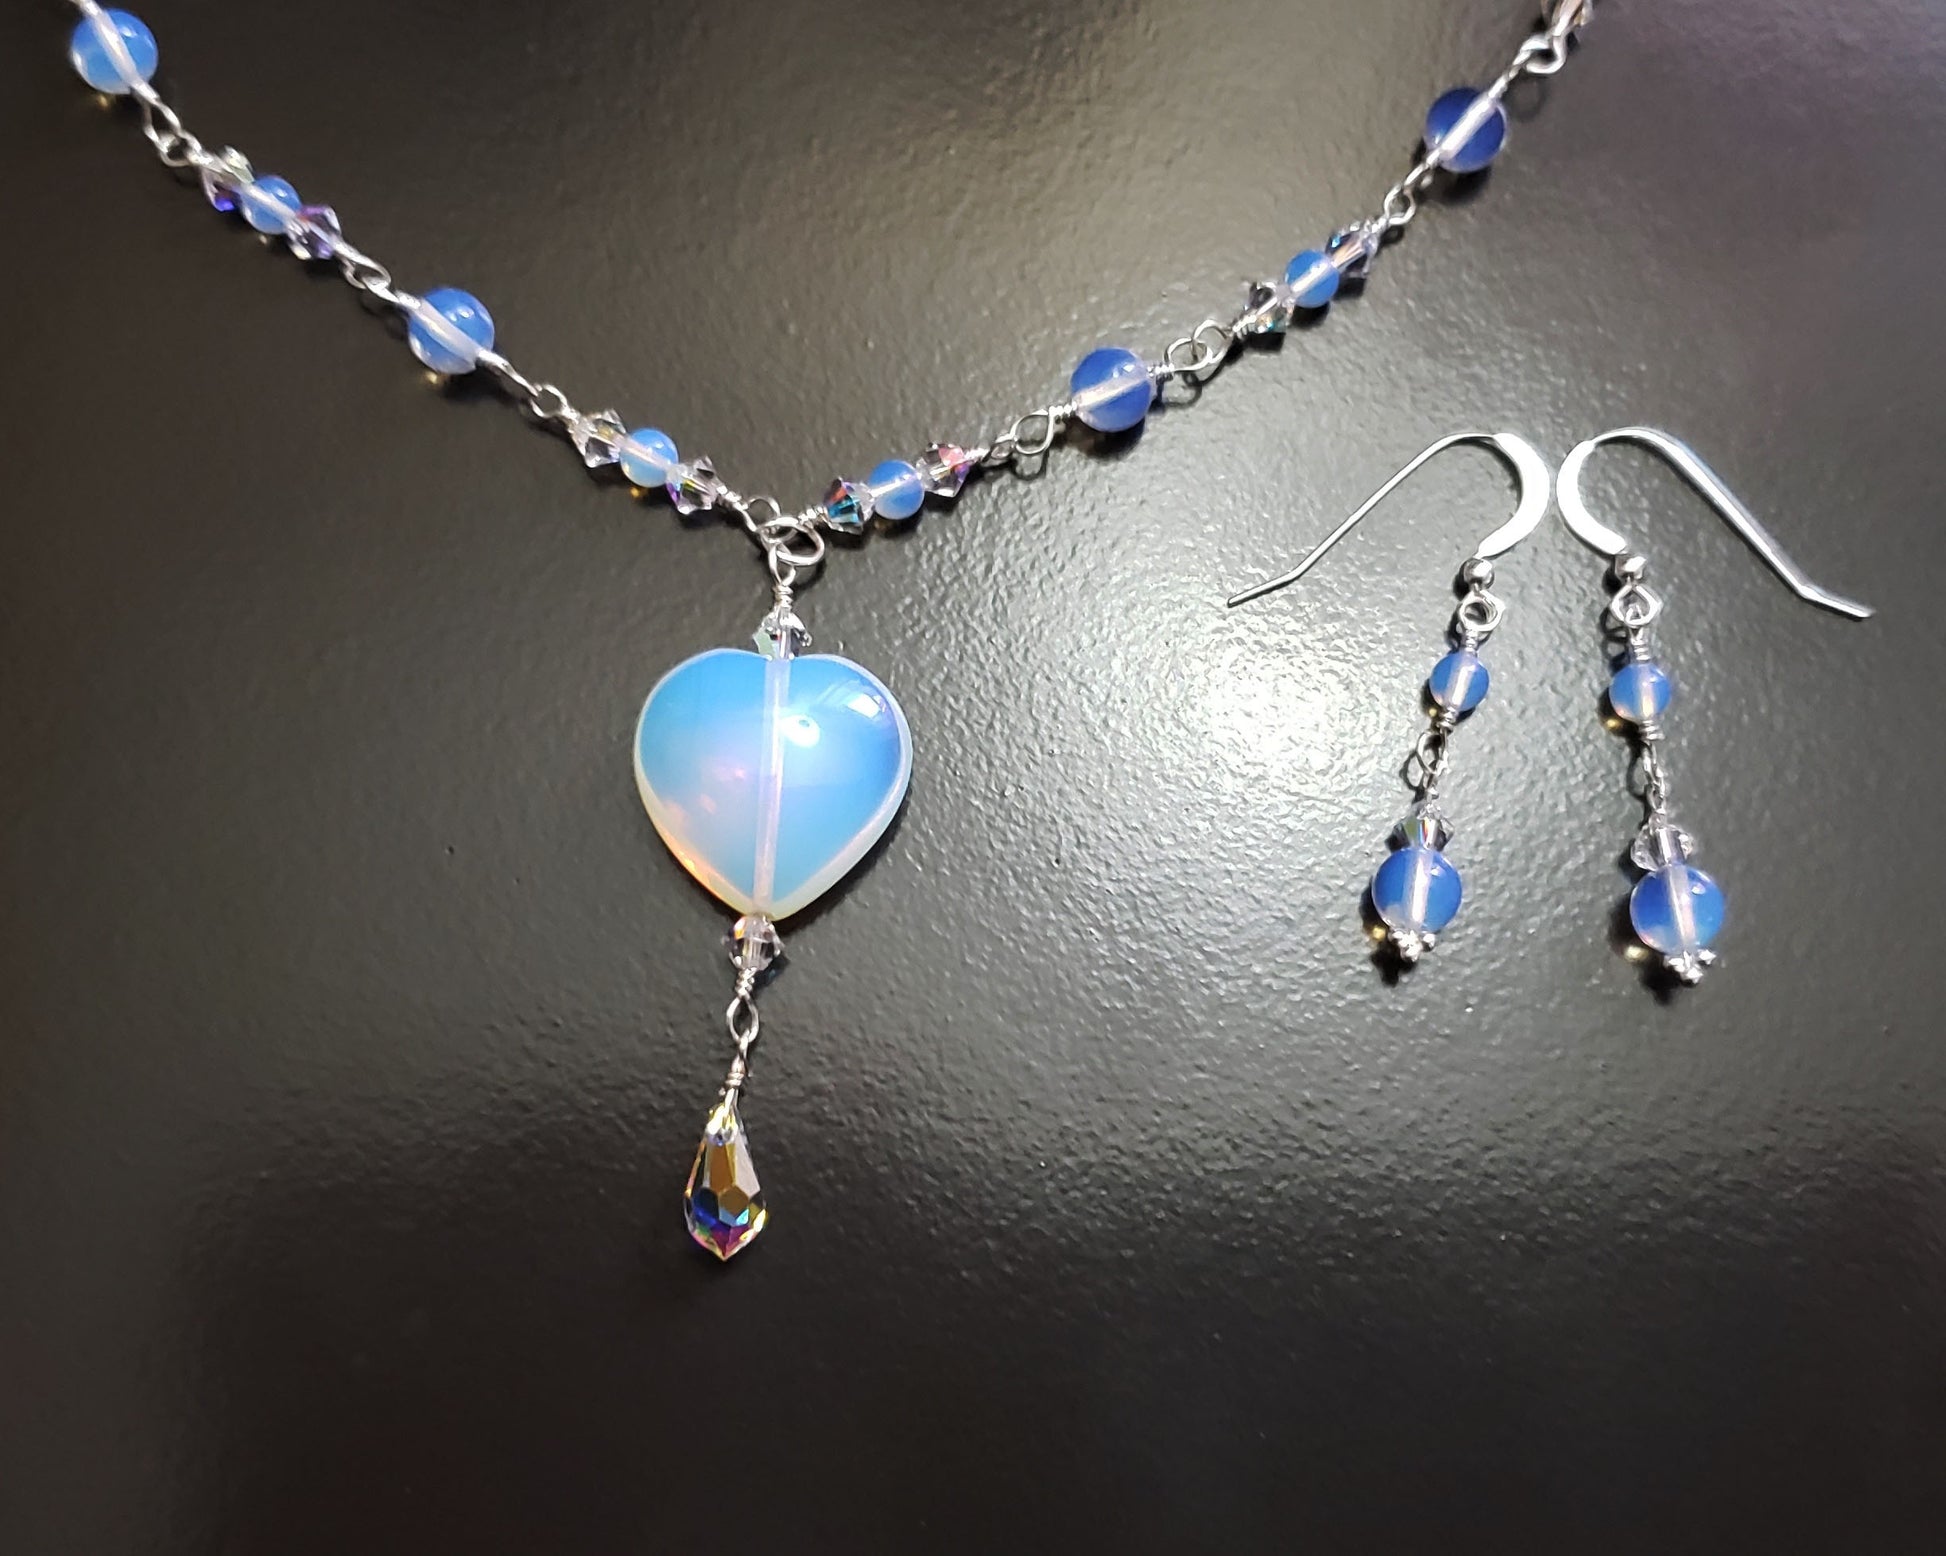 Art Deco Style Moon Glow Heart Necklace and Earring Set, Sterling Silver and Opalite Heart and beads with Crysal. A Y style necklace and dangle earring set